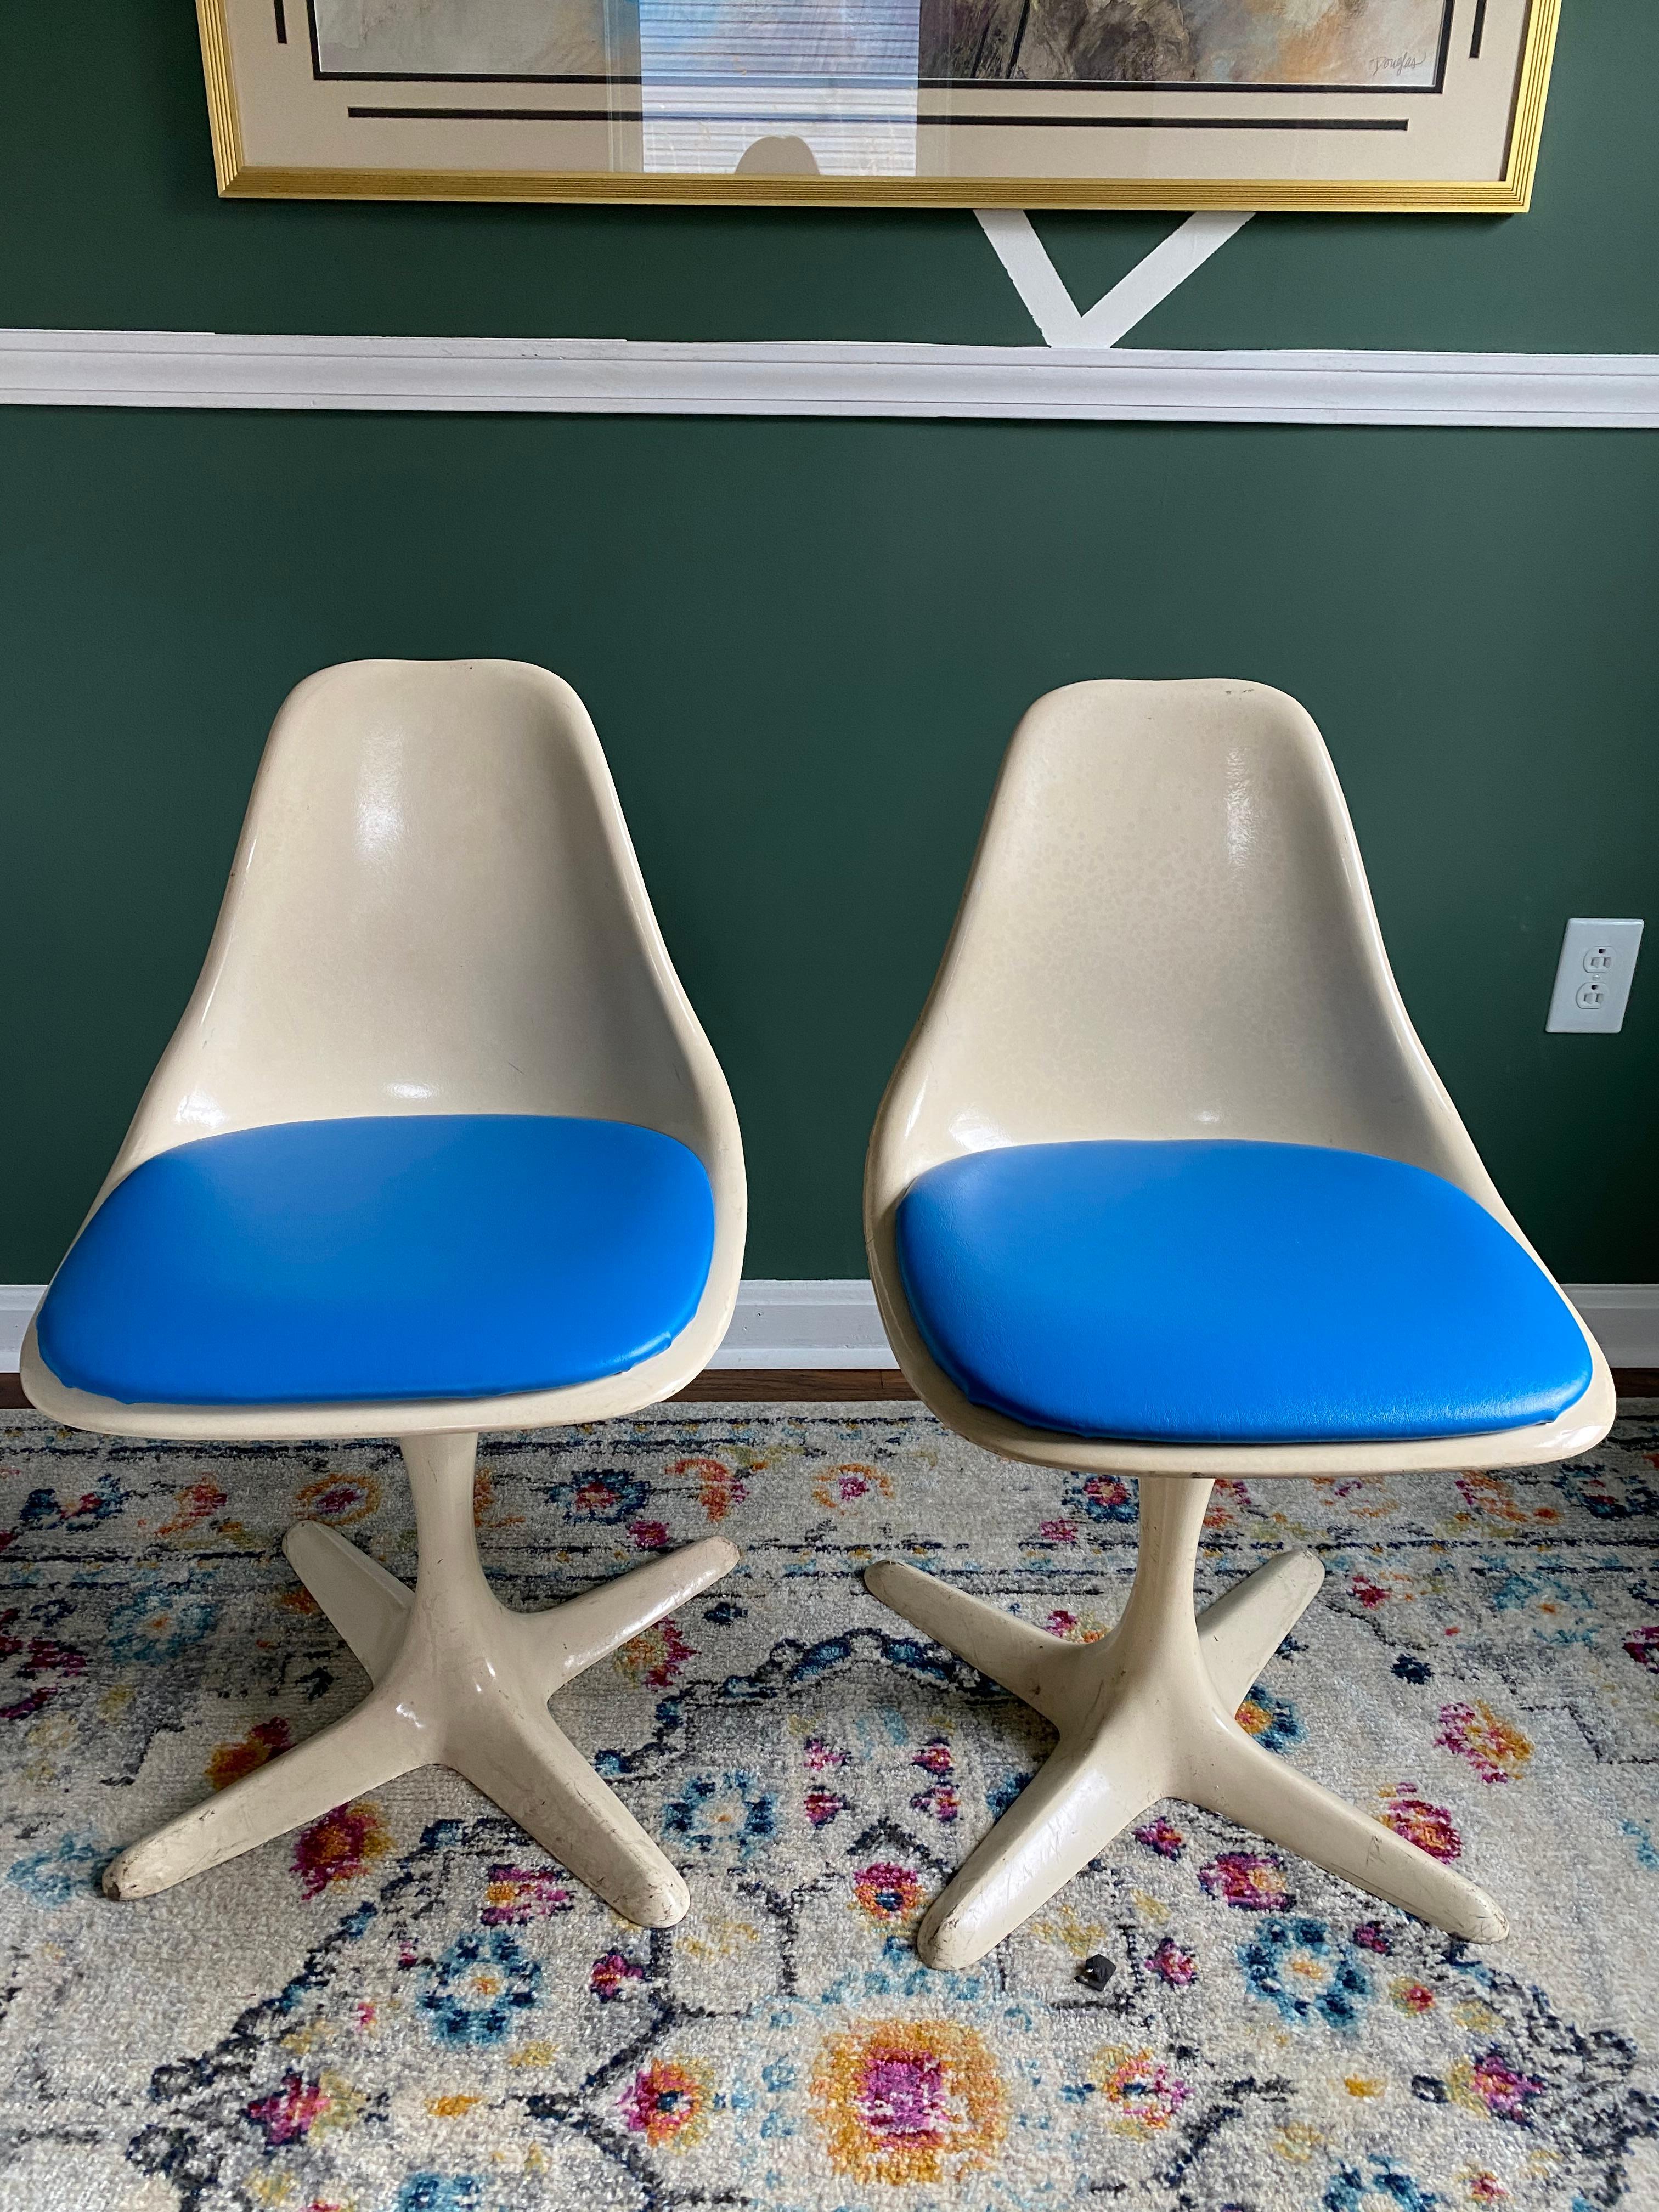 A pair of 1970s tulip chairs with propeller bases designed by Maurice Burke. These chairs feature white fiberglass shells, blue cushions and white enamel aluminum propeller bases. These chairs need to be restored, including the bases and cushions.